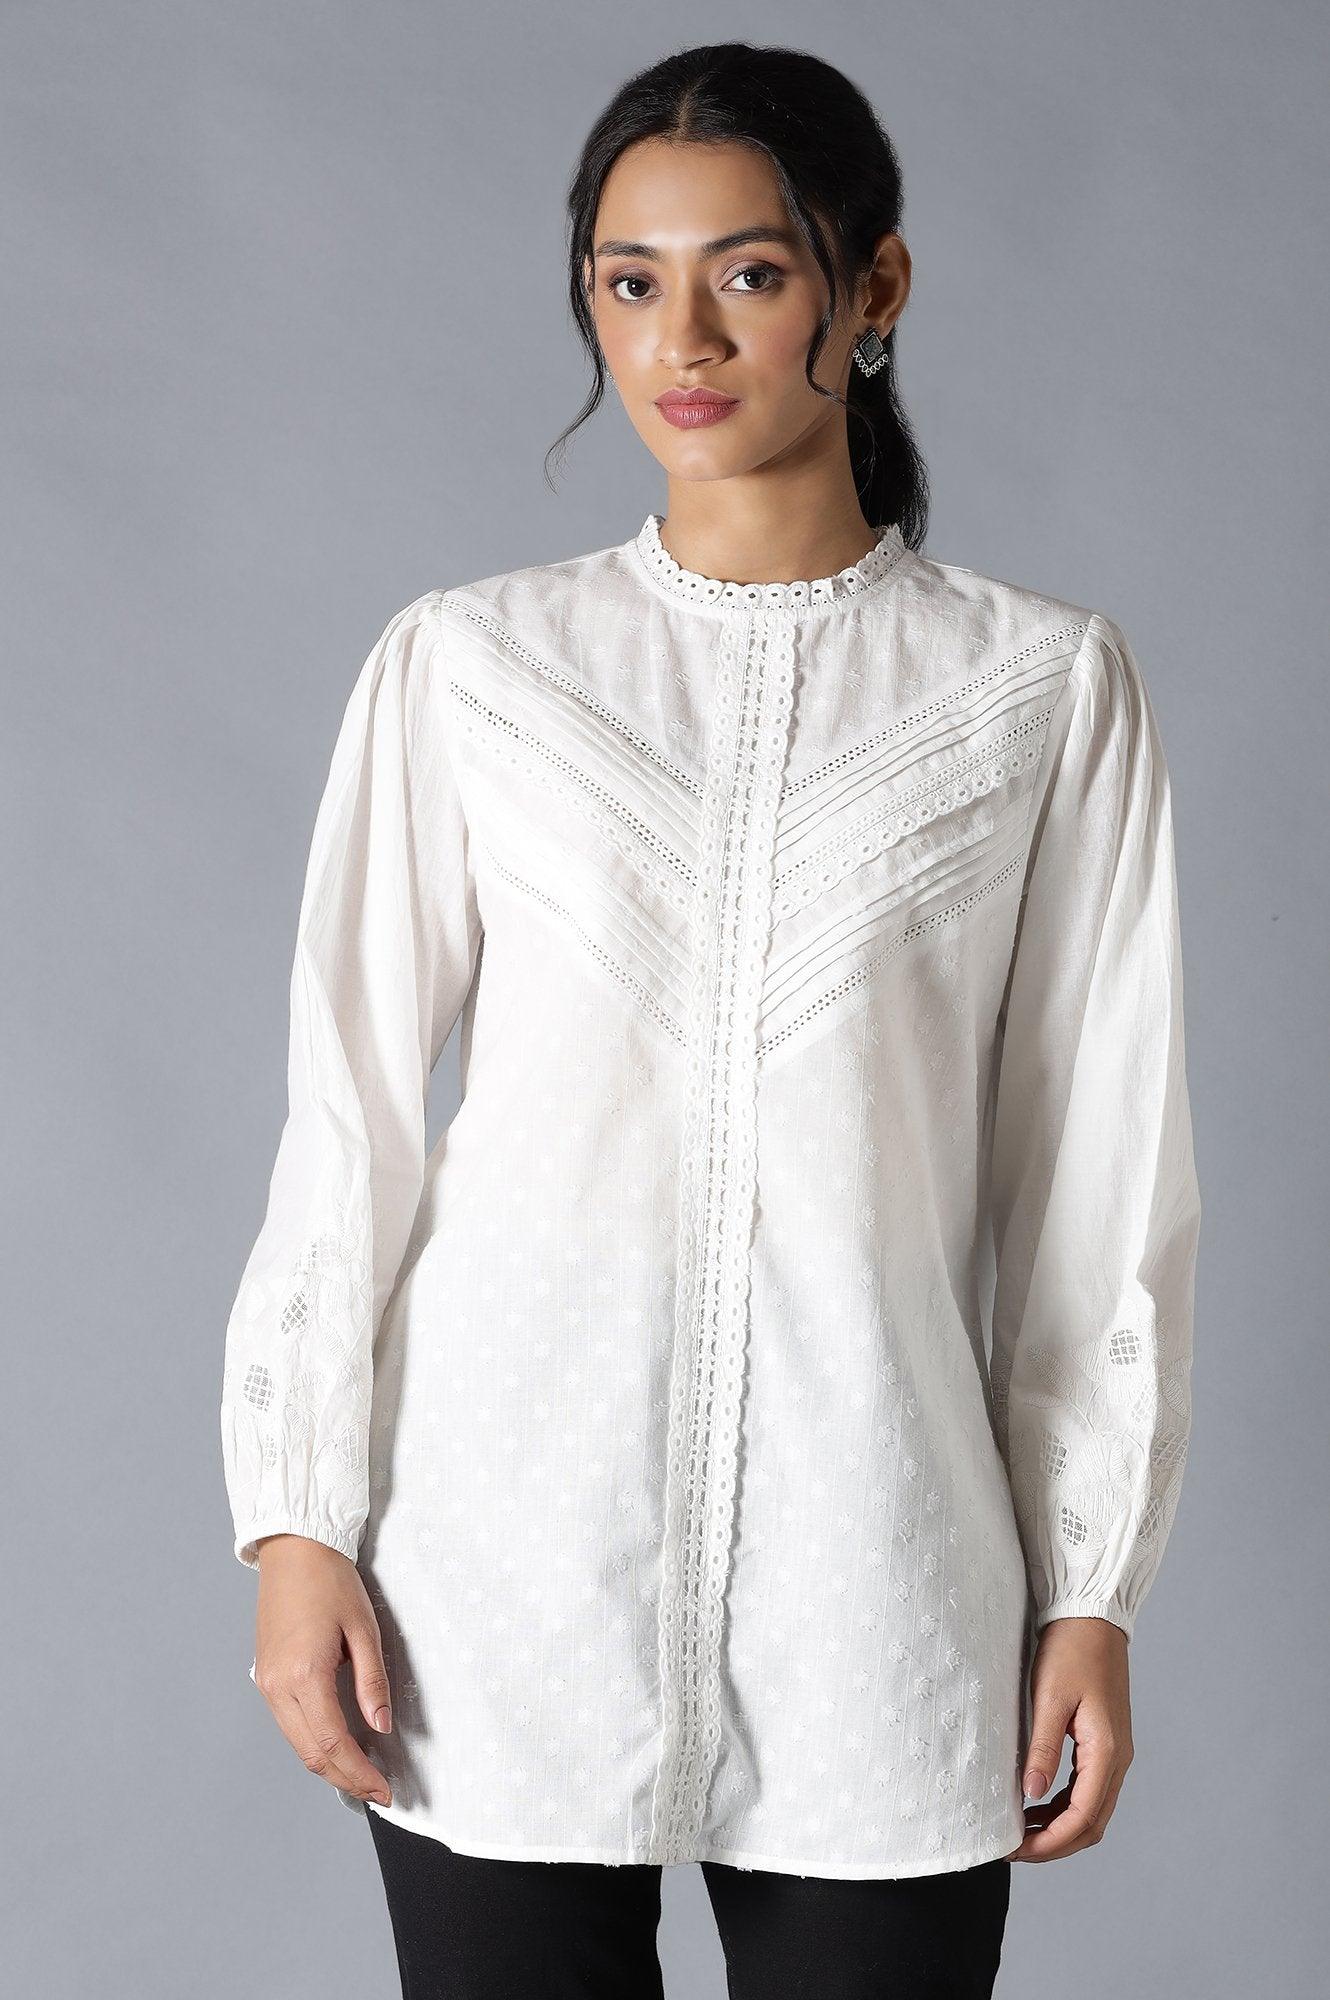 White Top With Lace And Applique Embroidered Sleeves - wforwoman